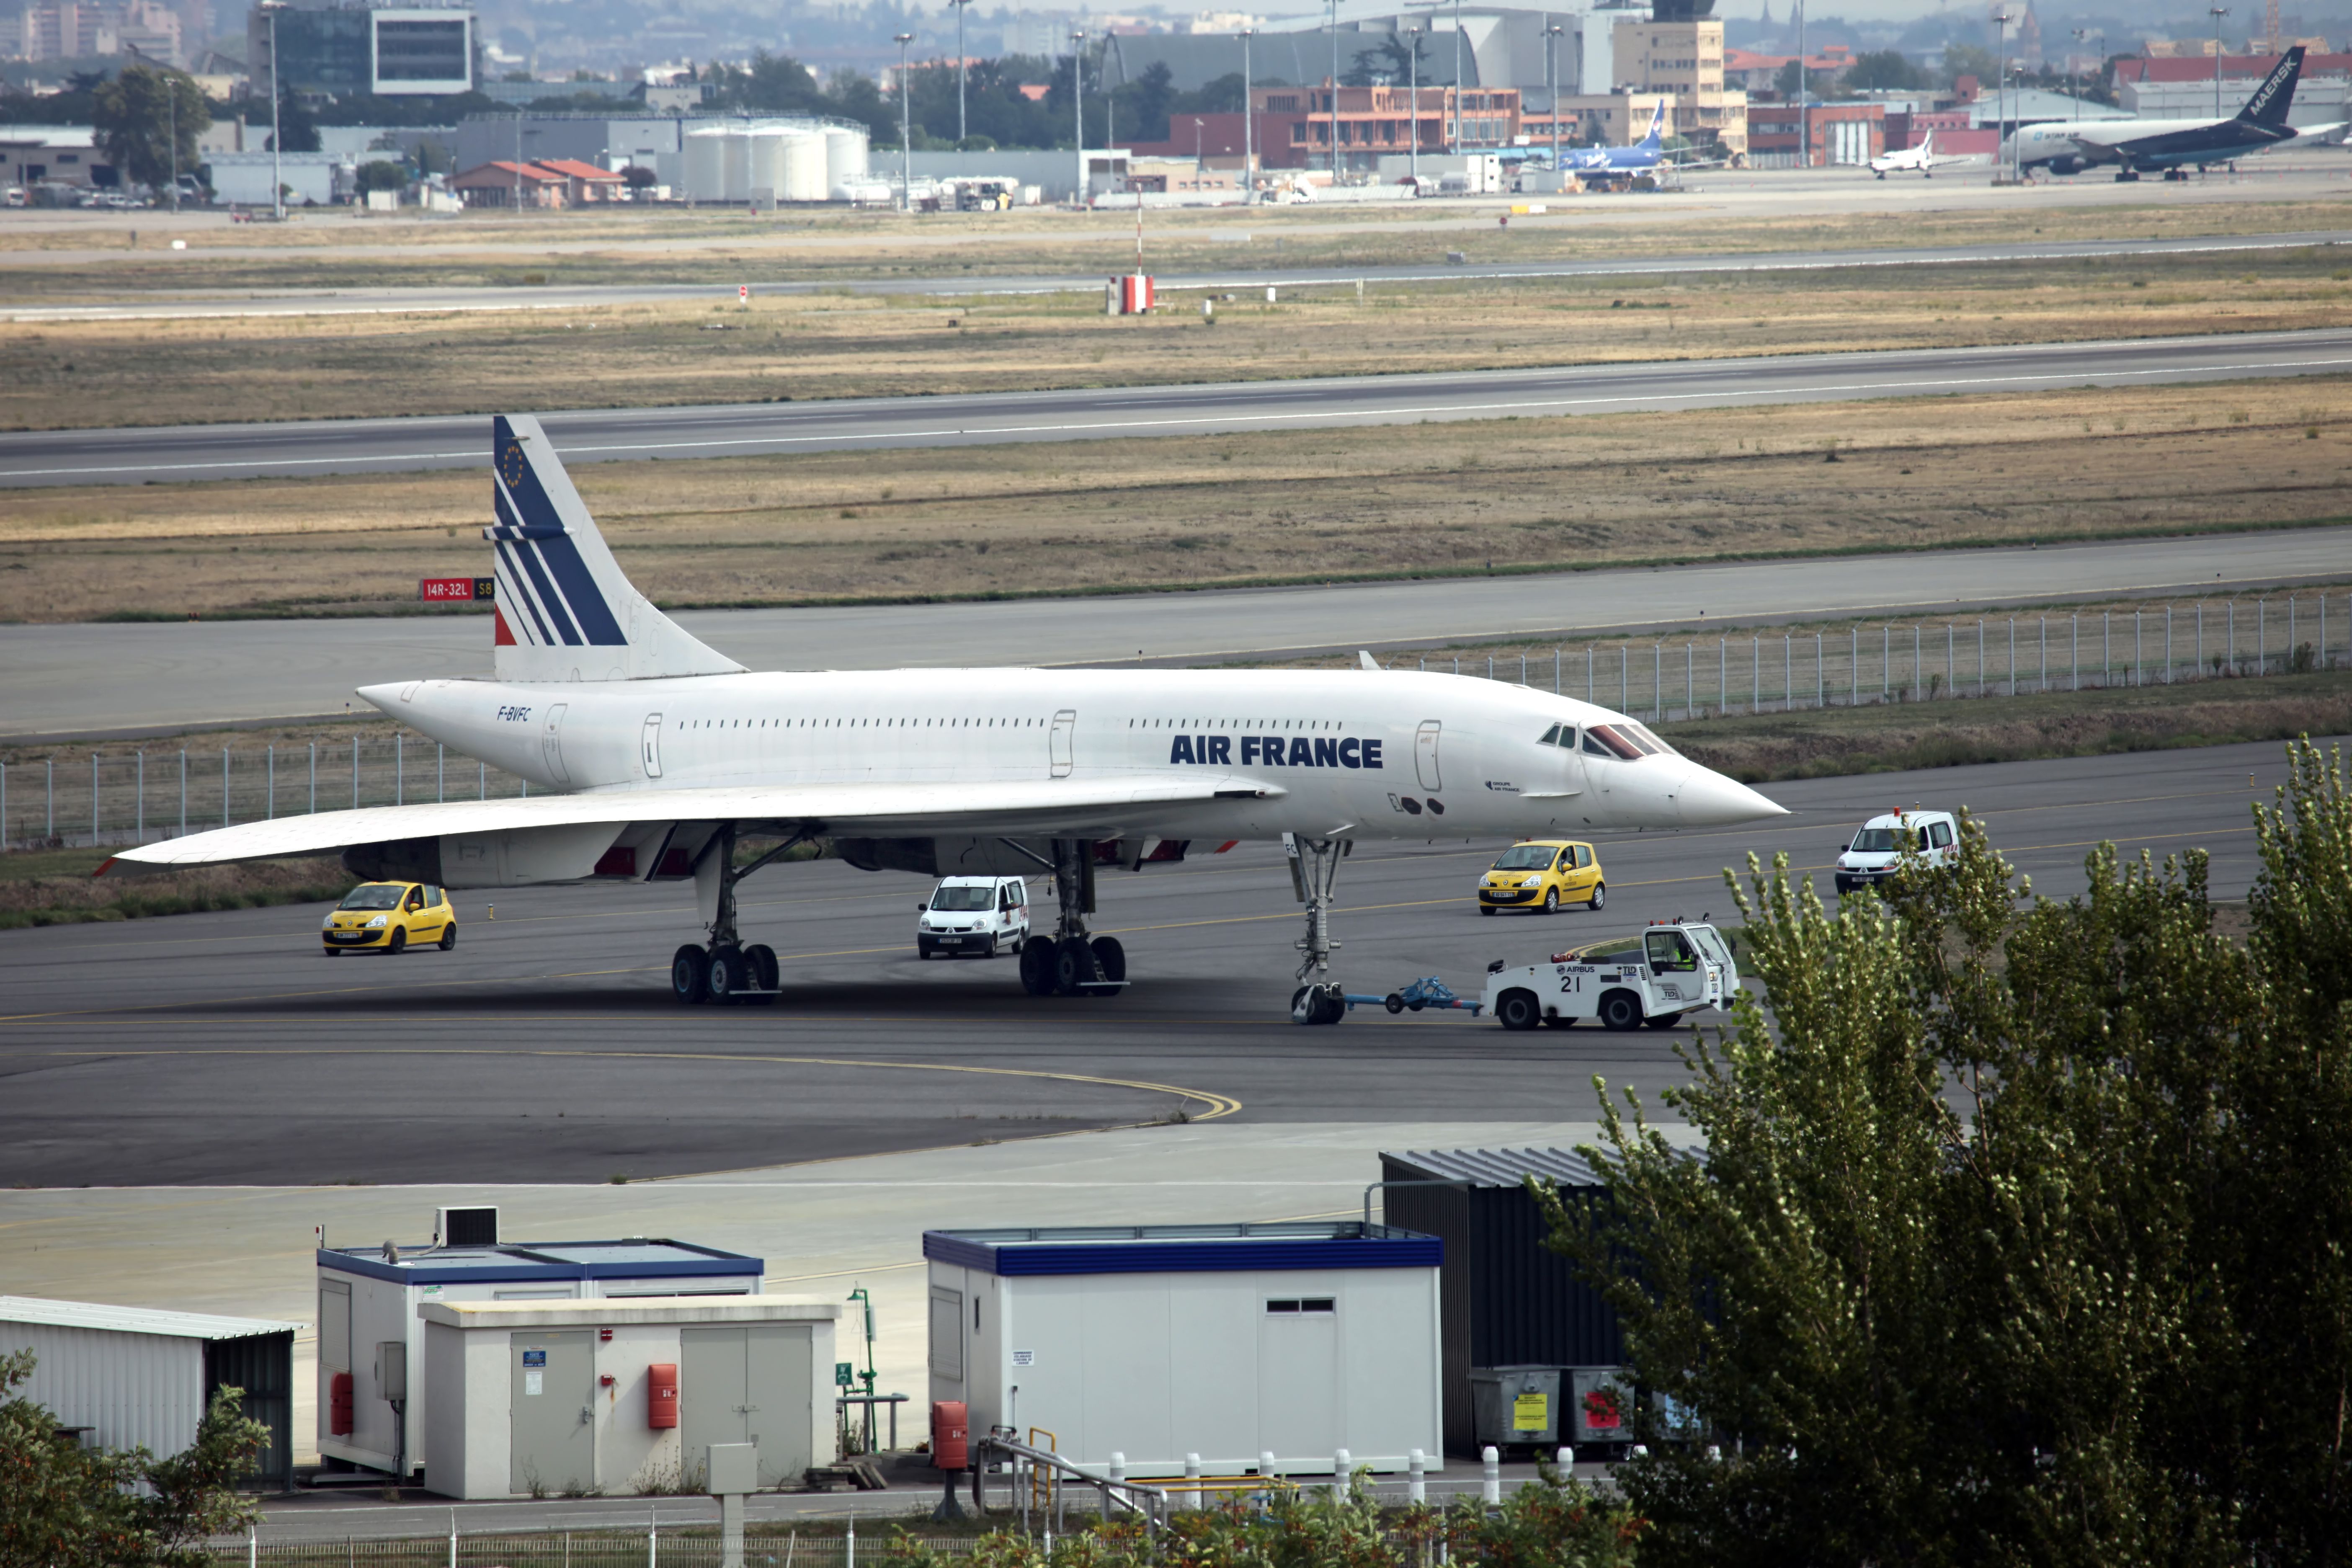 Air France Concorde On The Ground In Toulouse